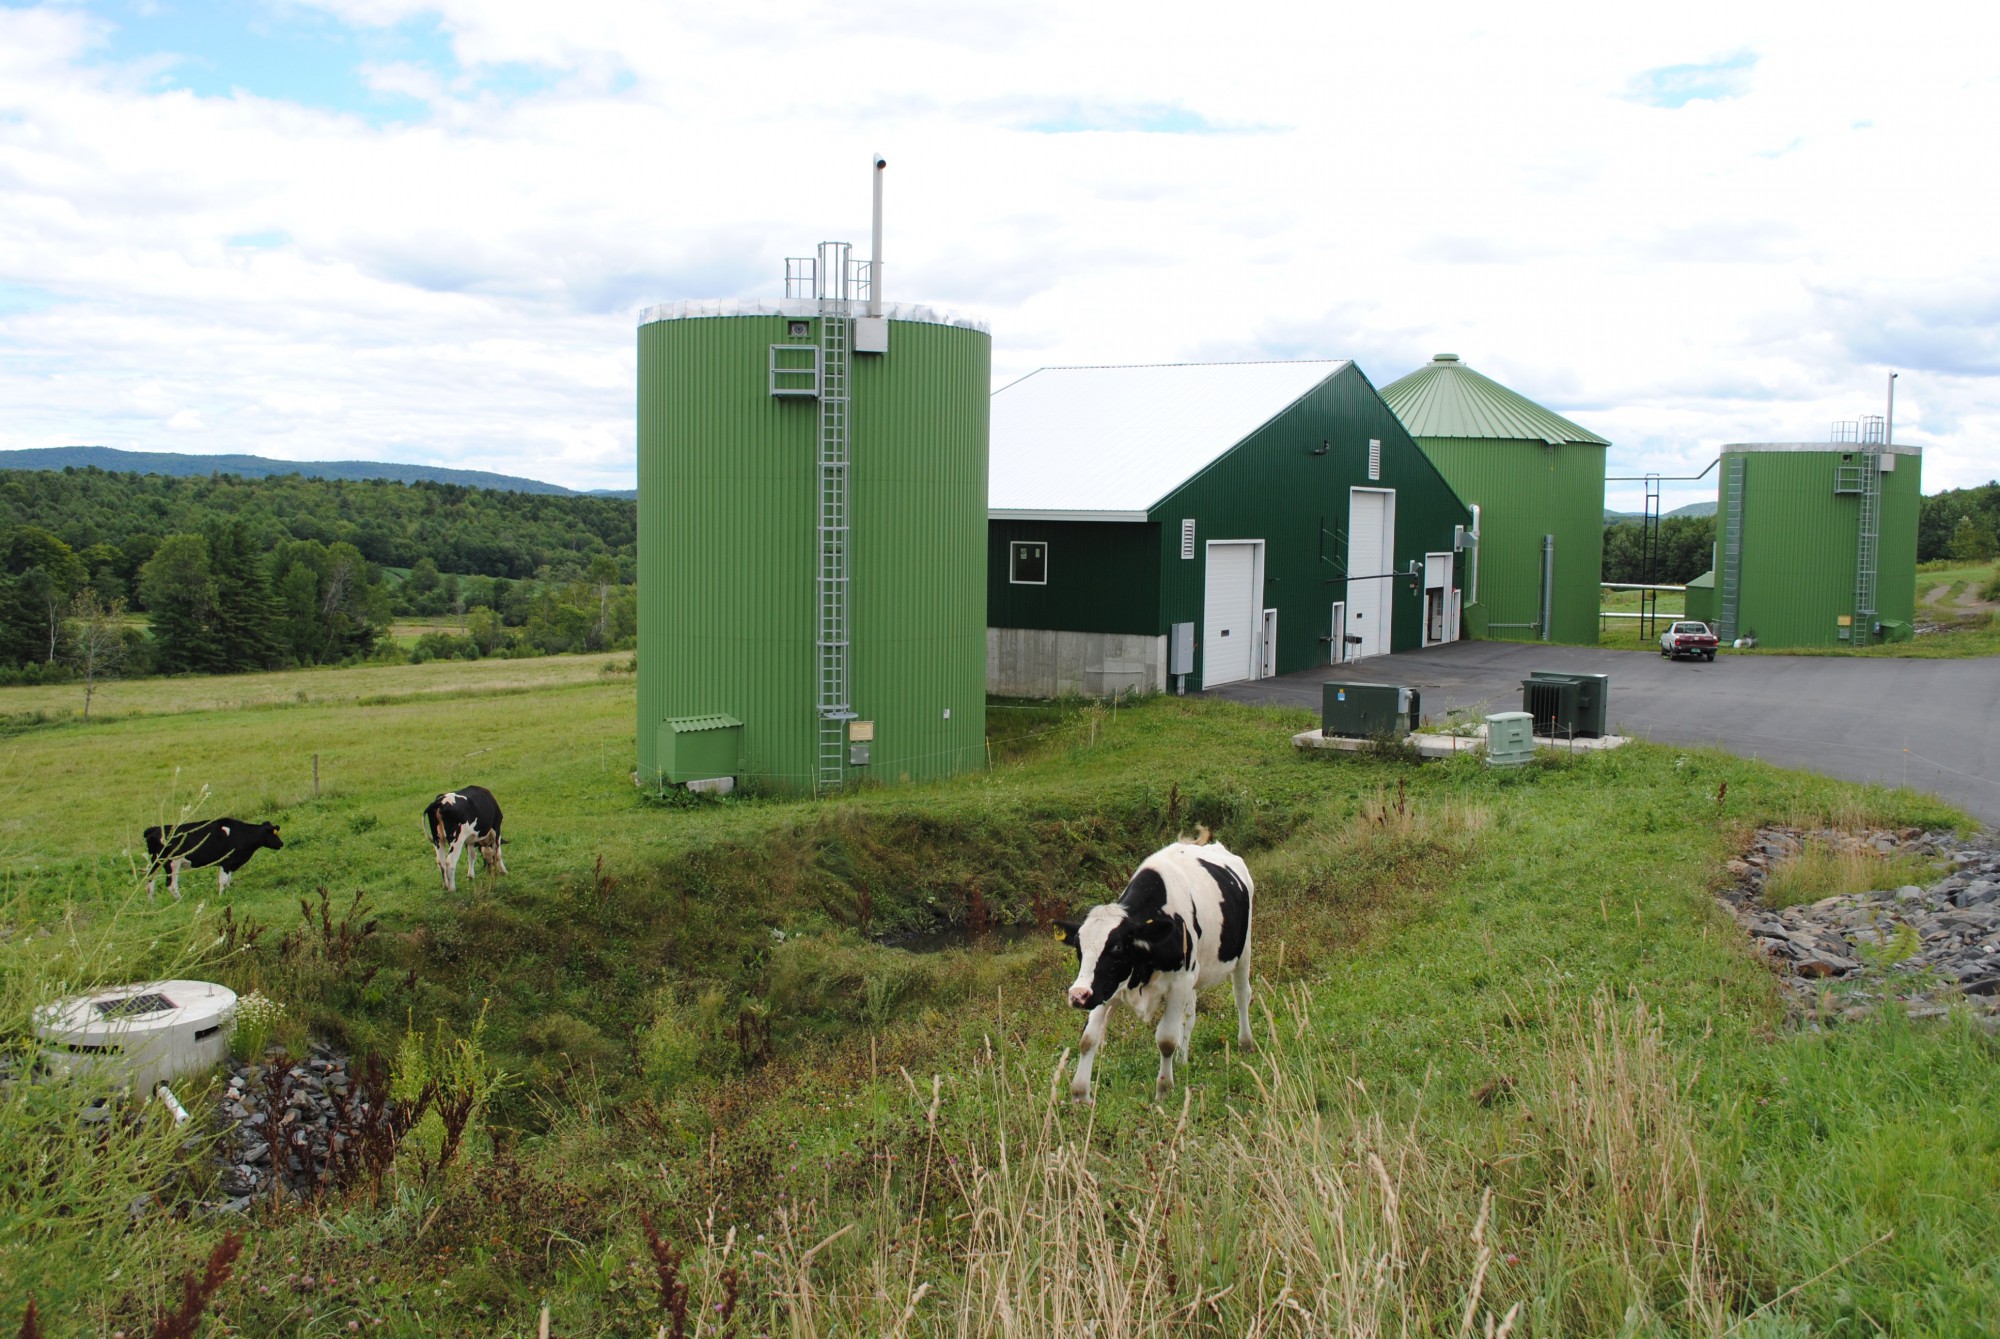 Community scale biodigester demonstrates renewable energy, waste reduction, and nutrient management in Vermont